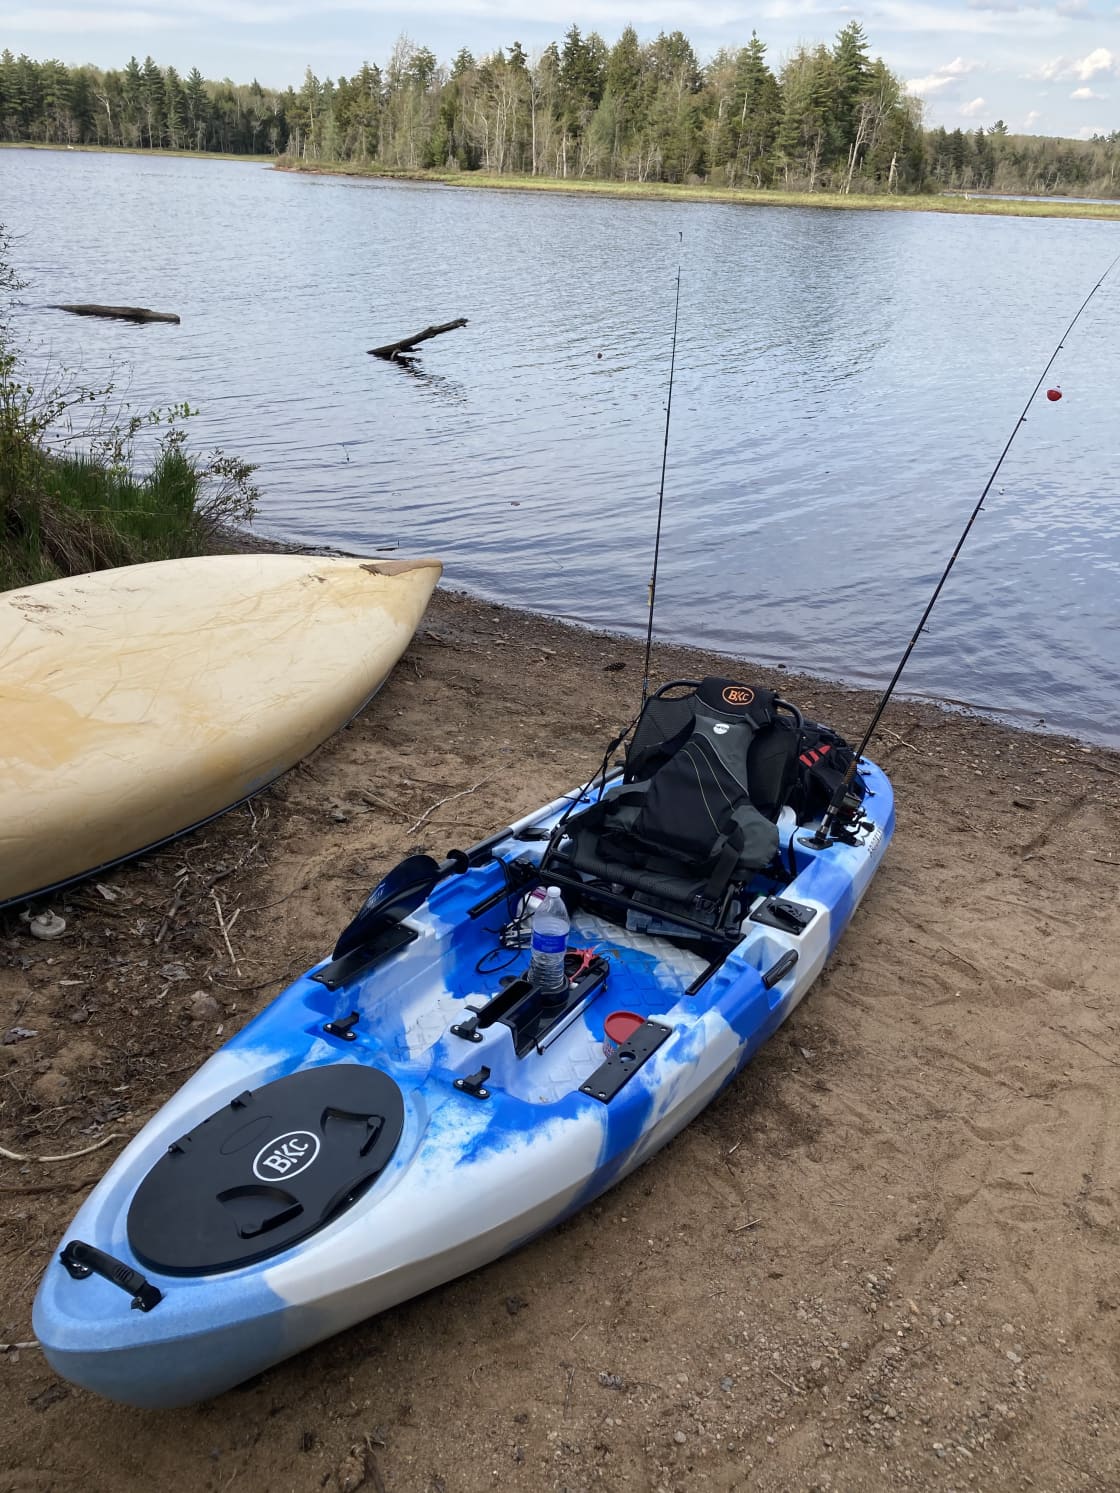 There's a great place to launch and keep your kayak.